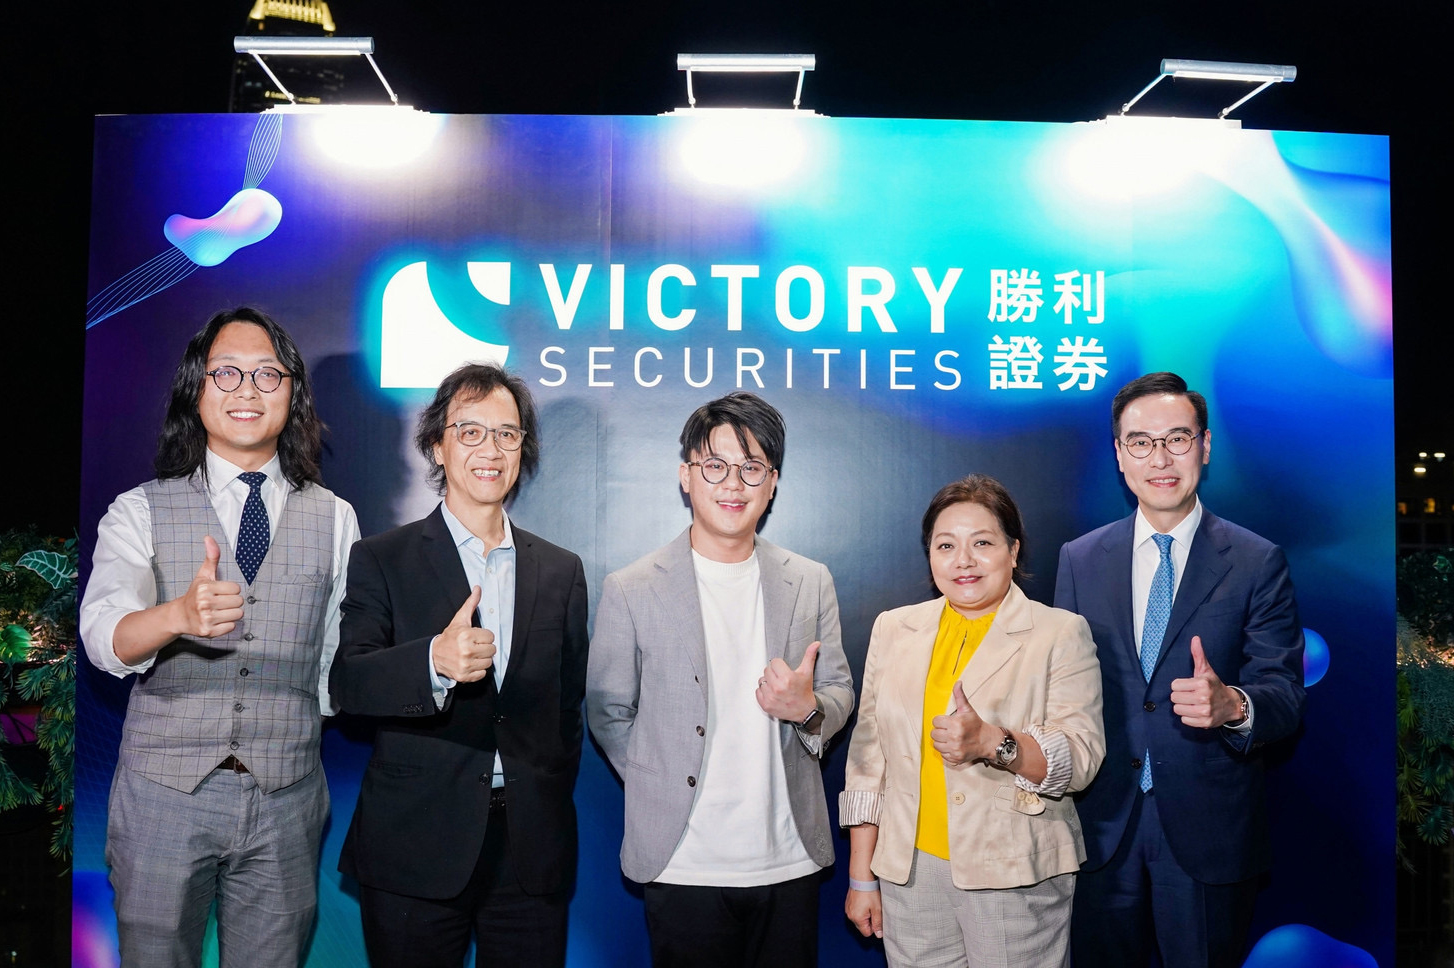 A group of traditional financial & web3 celebrities showed up to witness the new milestone of the financial industry in Hong Kong. From left: Mr. Casper Mok, Mr. Felix Man, Mr. Kennix Chan, Ms. Agnes Wu, Mr. Kenny Tang